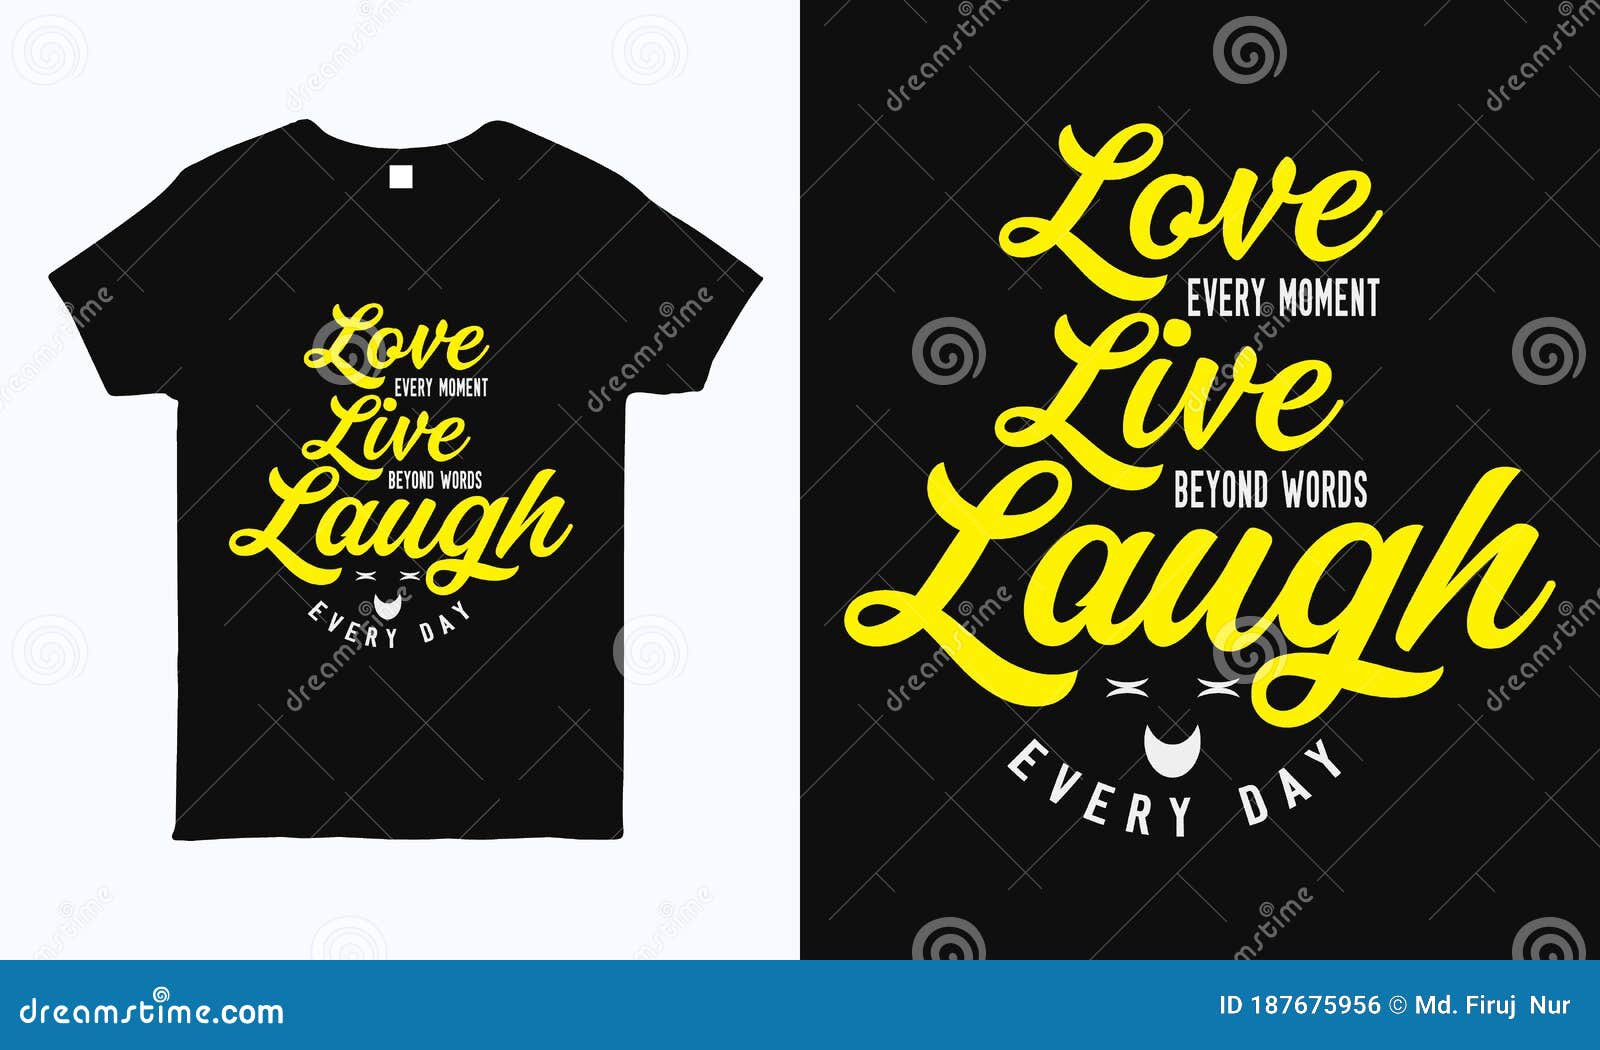 Love Every Moment. Typography Motivational T Shirt Design Template ...